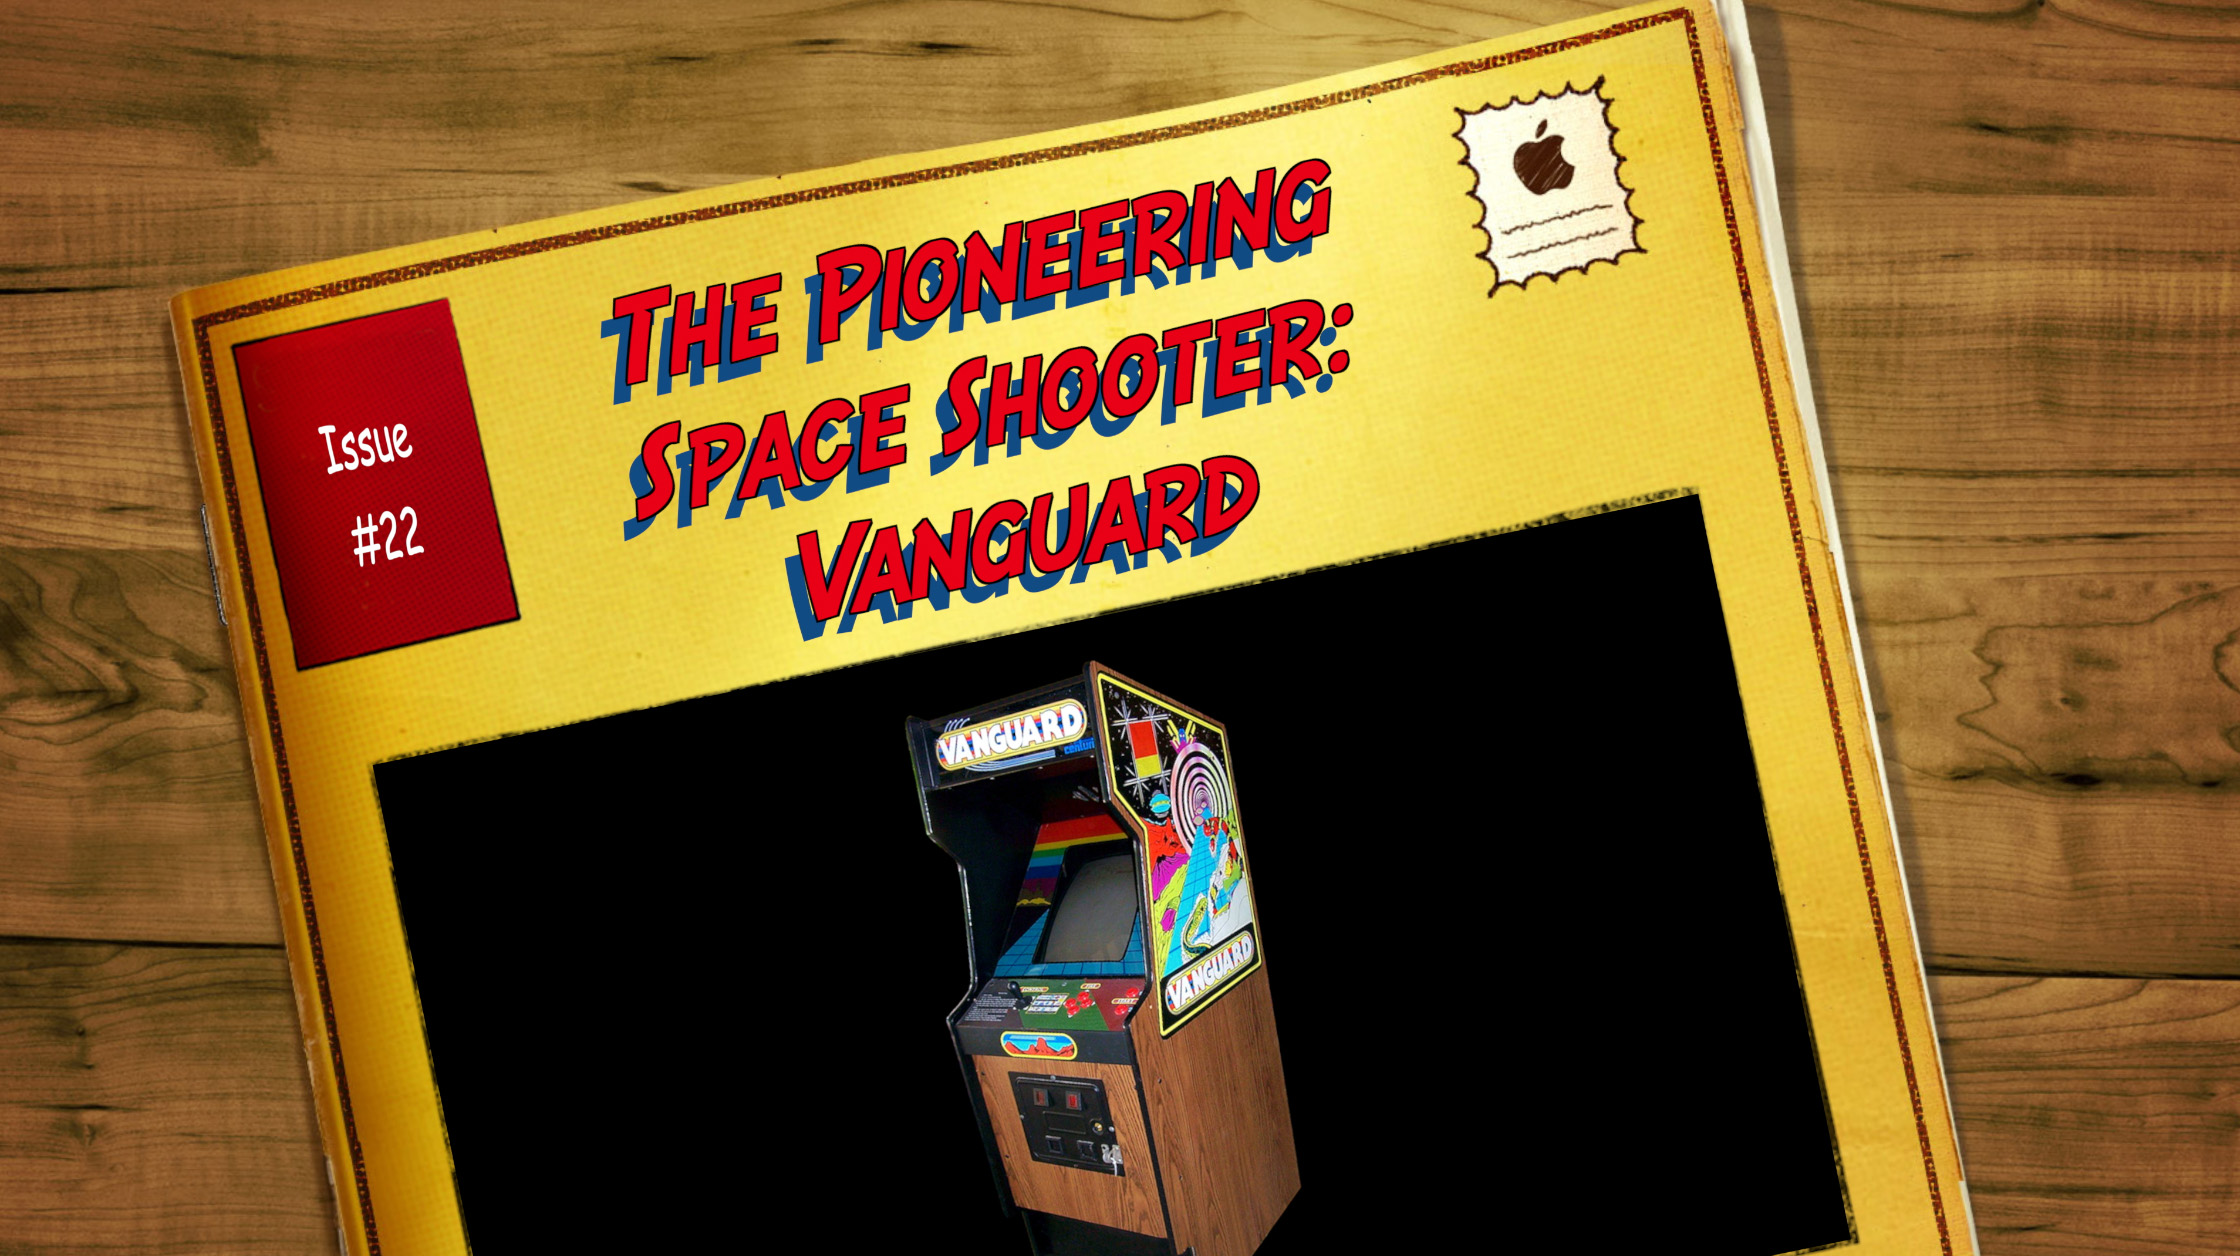 Issue #22 The Pioneering Space Shooter: Vanguard